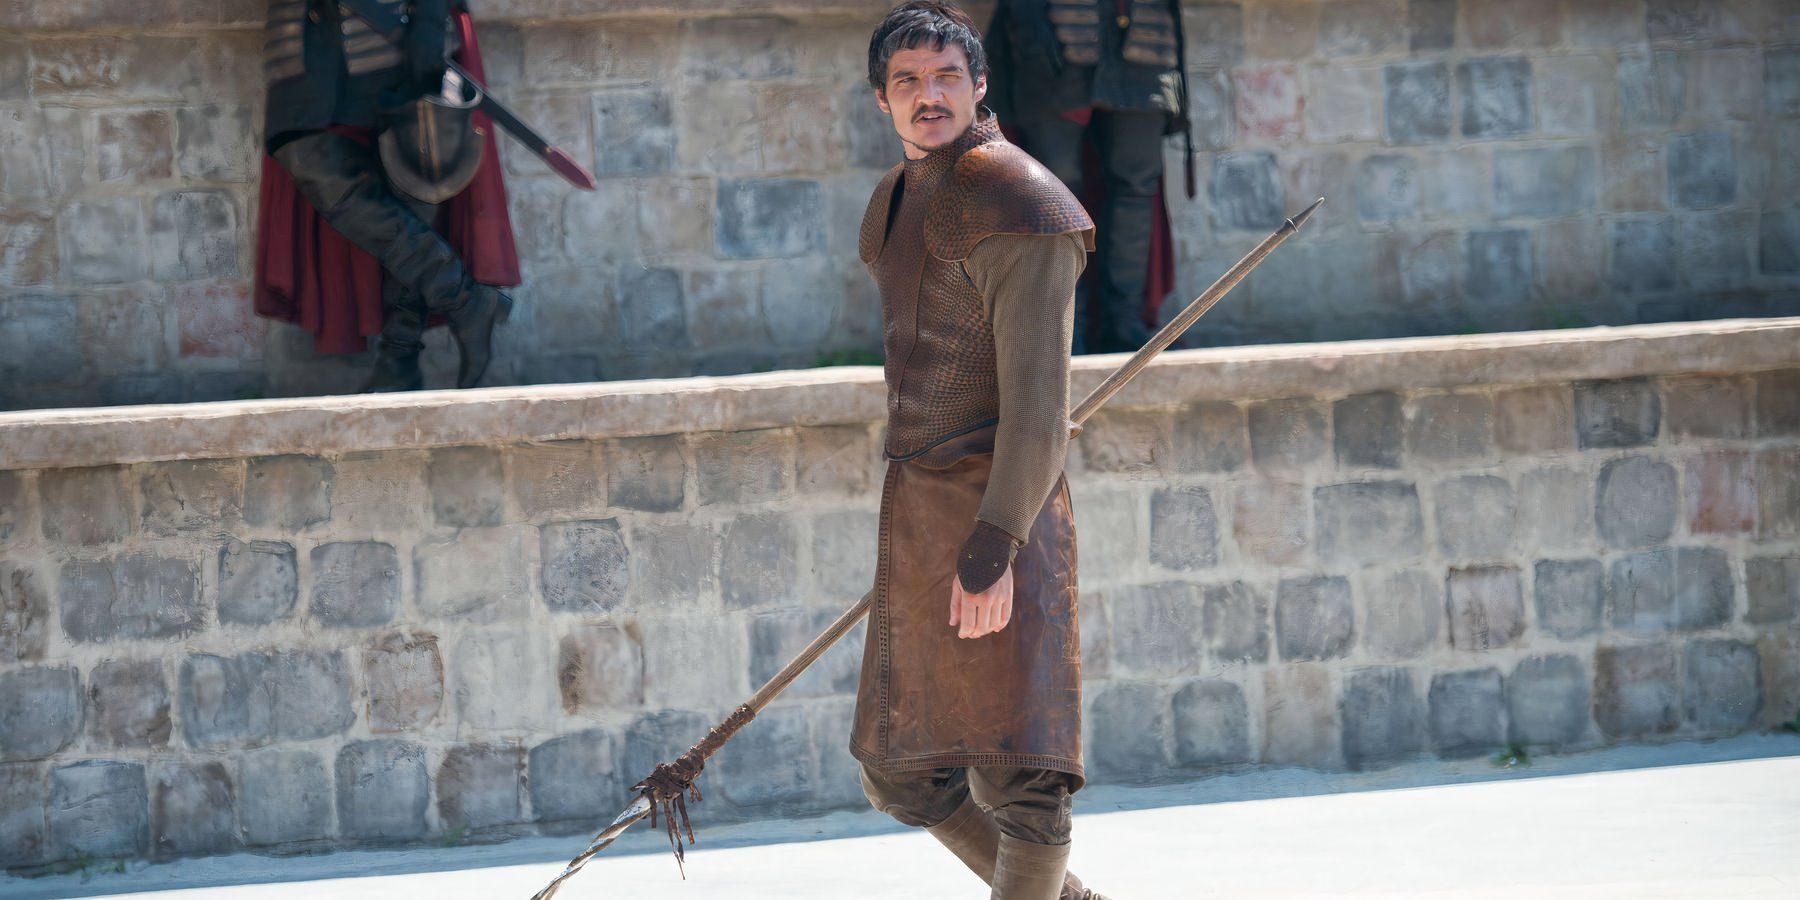 Pedro Pascal as Oberyn Martell using a spear against The Mountain in Game of Thrones